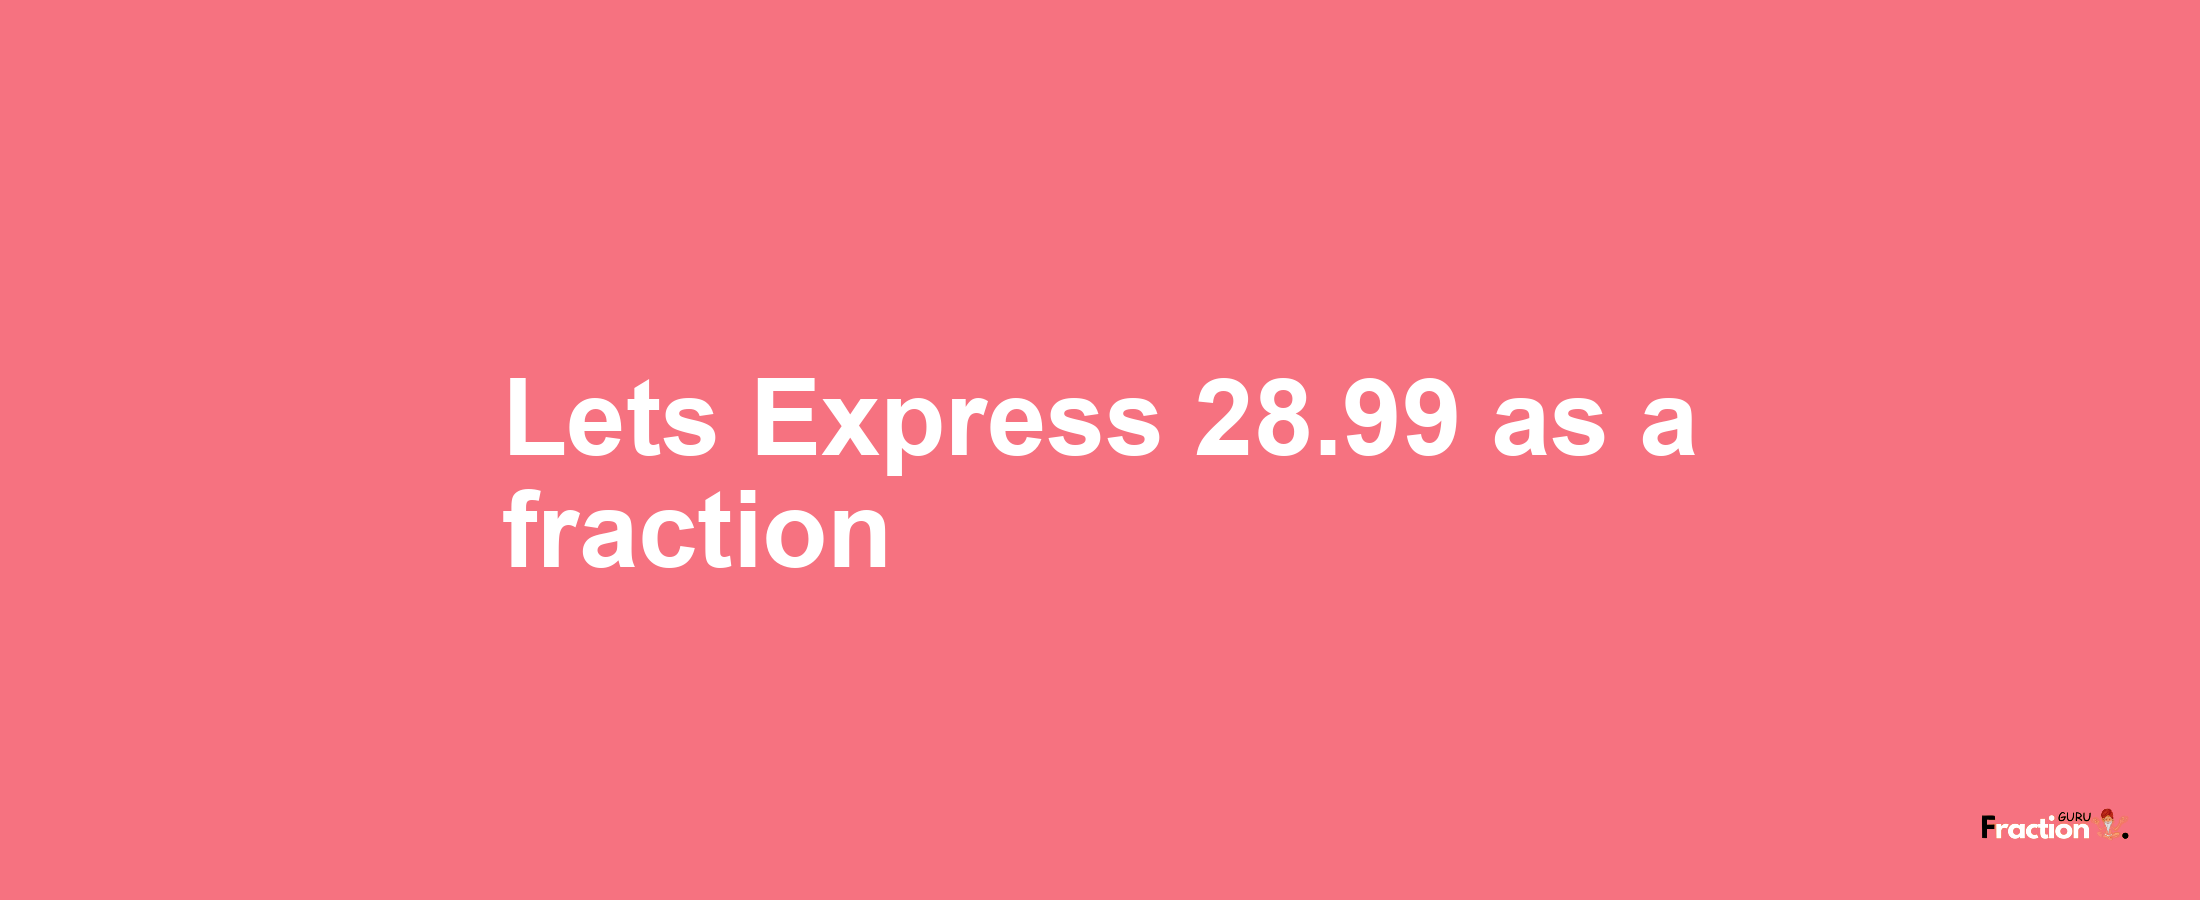 Lets Express 28.99 as afraction